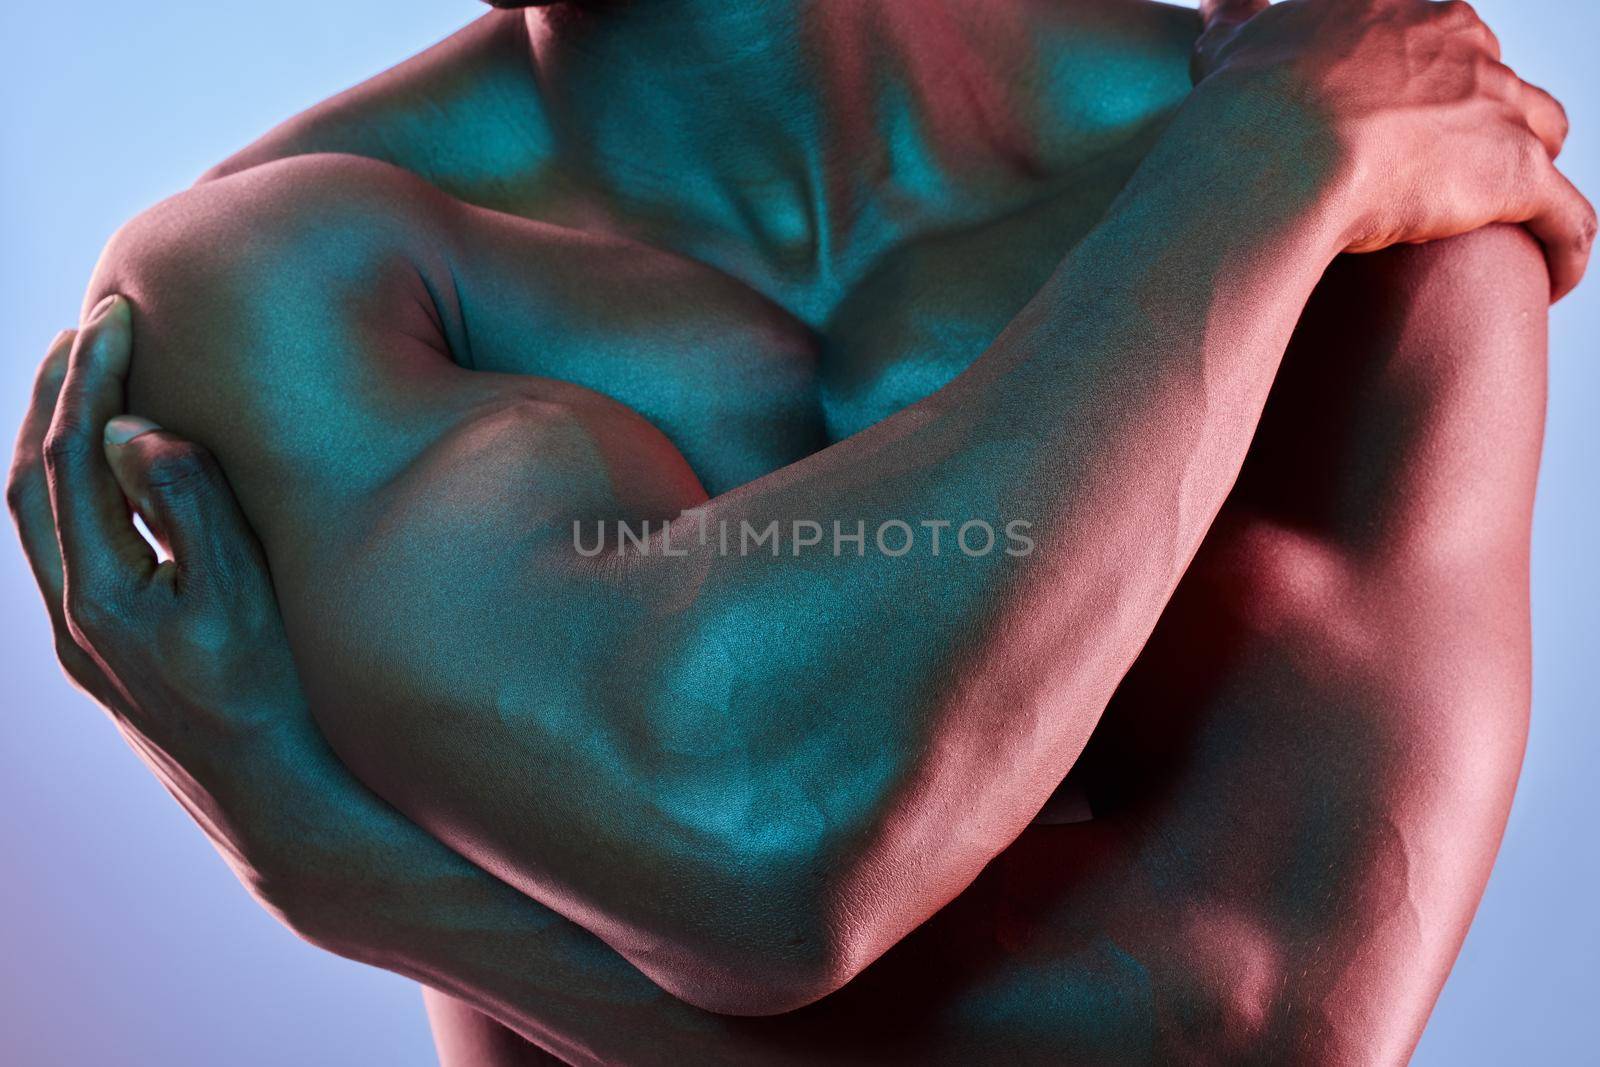 Shot of a muscular man posing against a studio background.